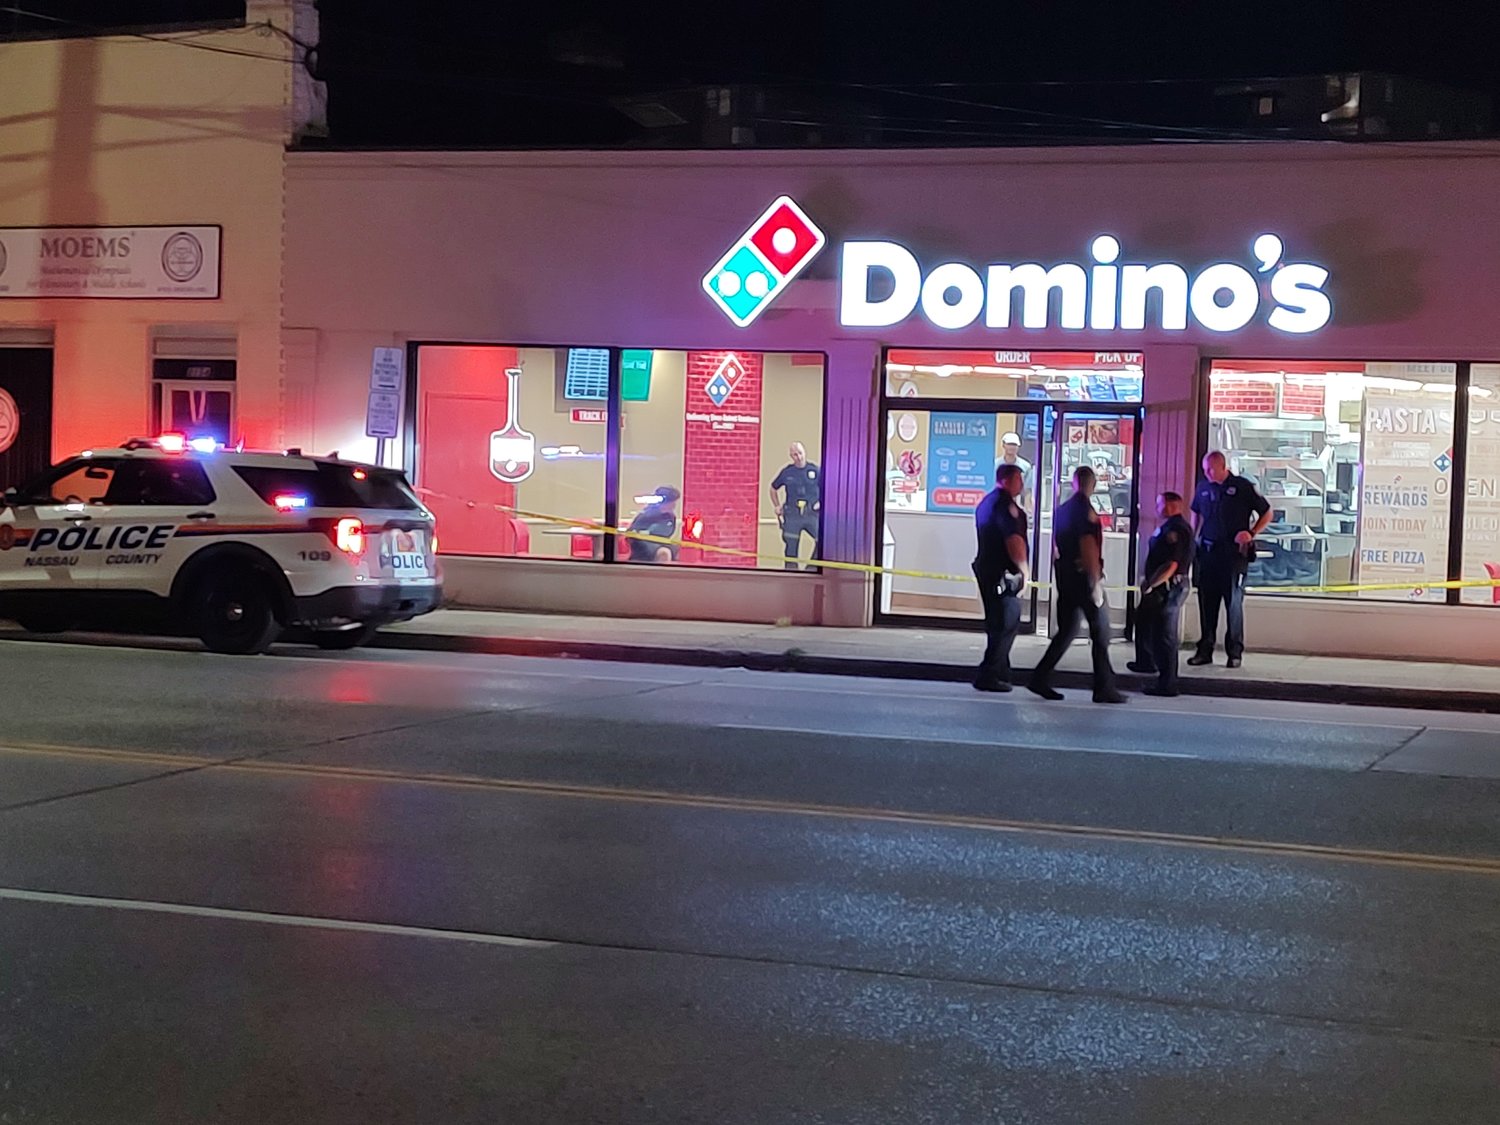 A teenager was stabbed last night at the Domino's Pizza in Bellmore.